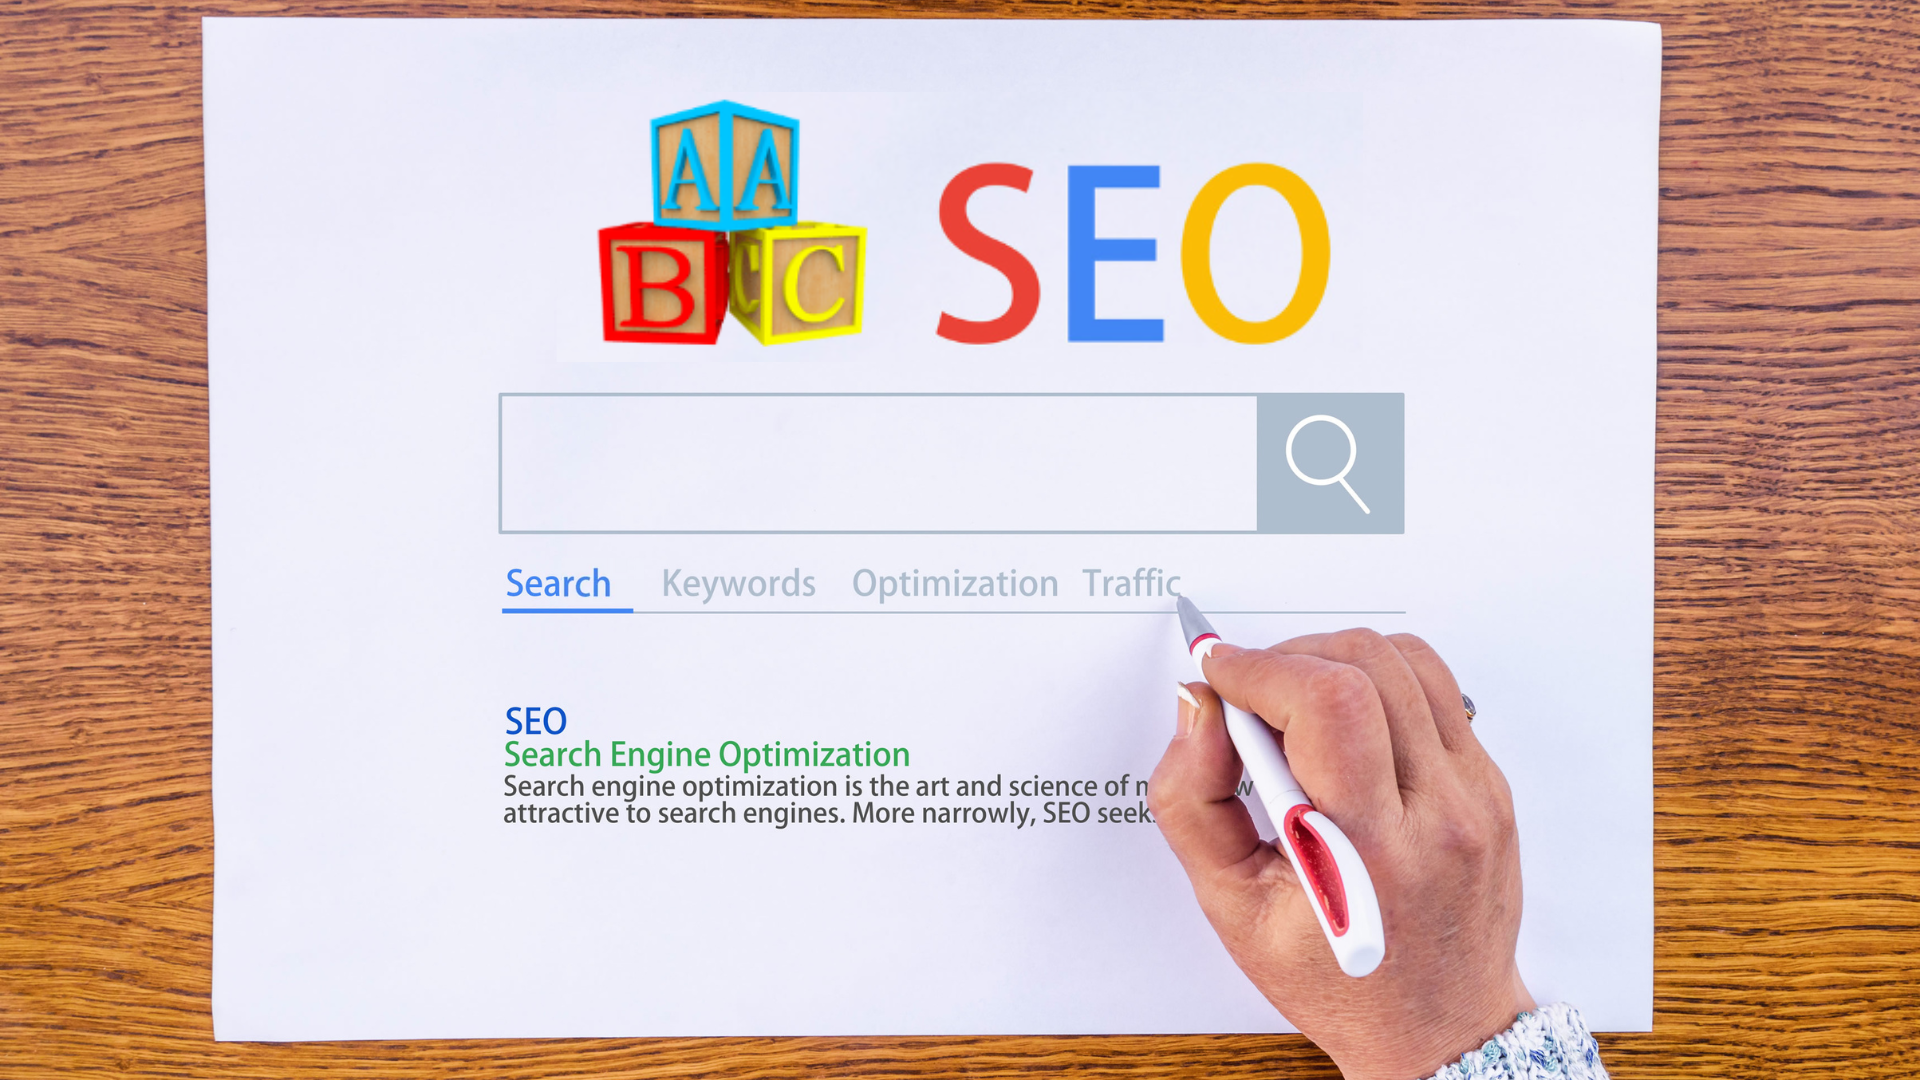 20221109-The-ABCs-of-SEO-26-SEO-Terms-to-Know-Jeff-B..png